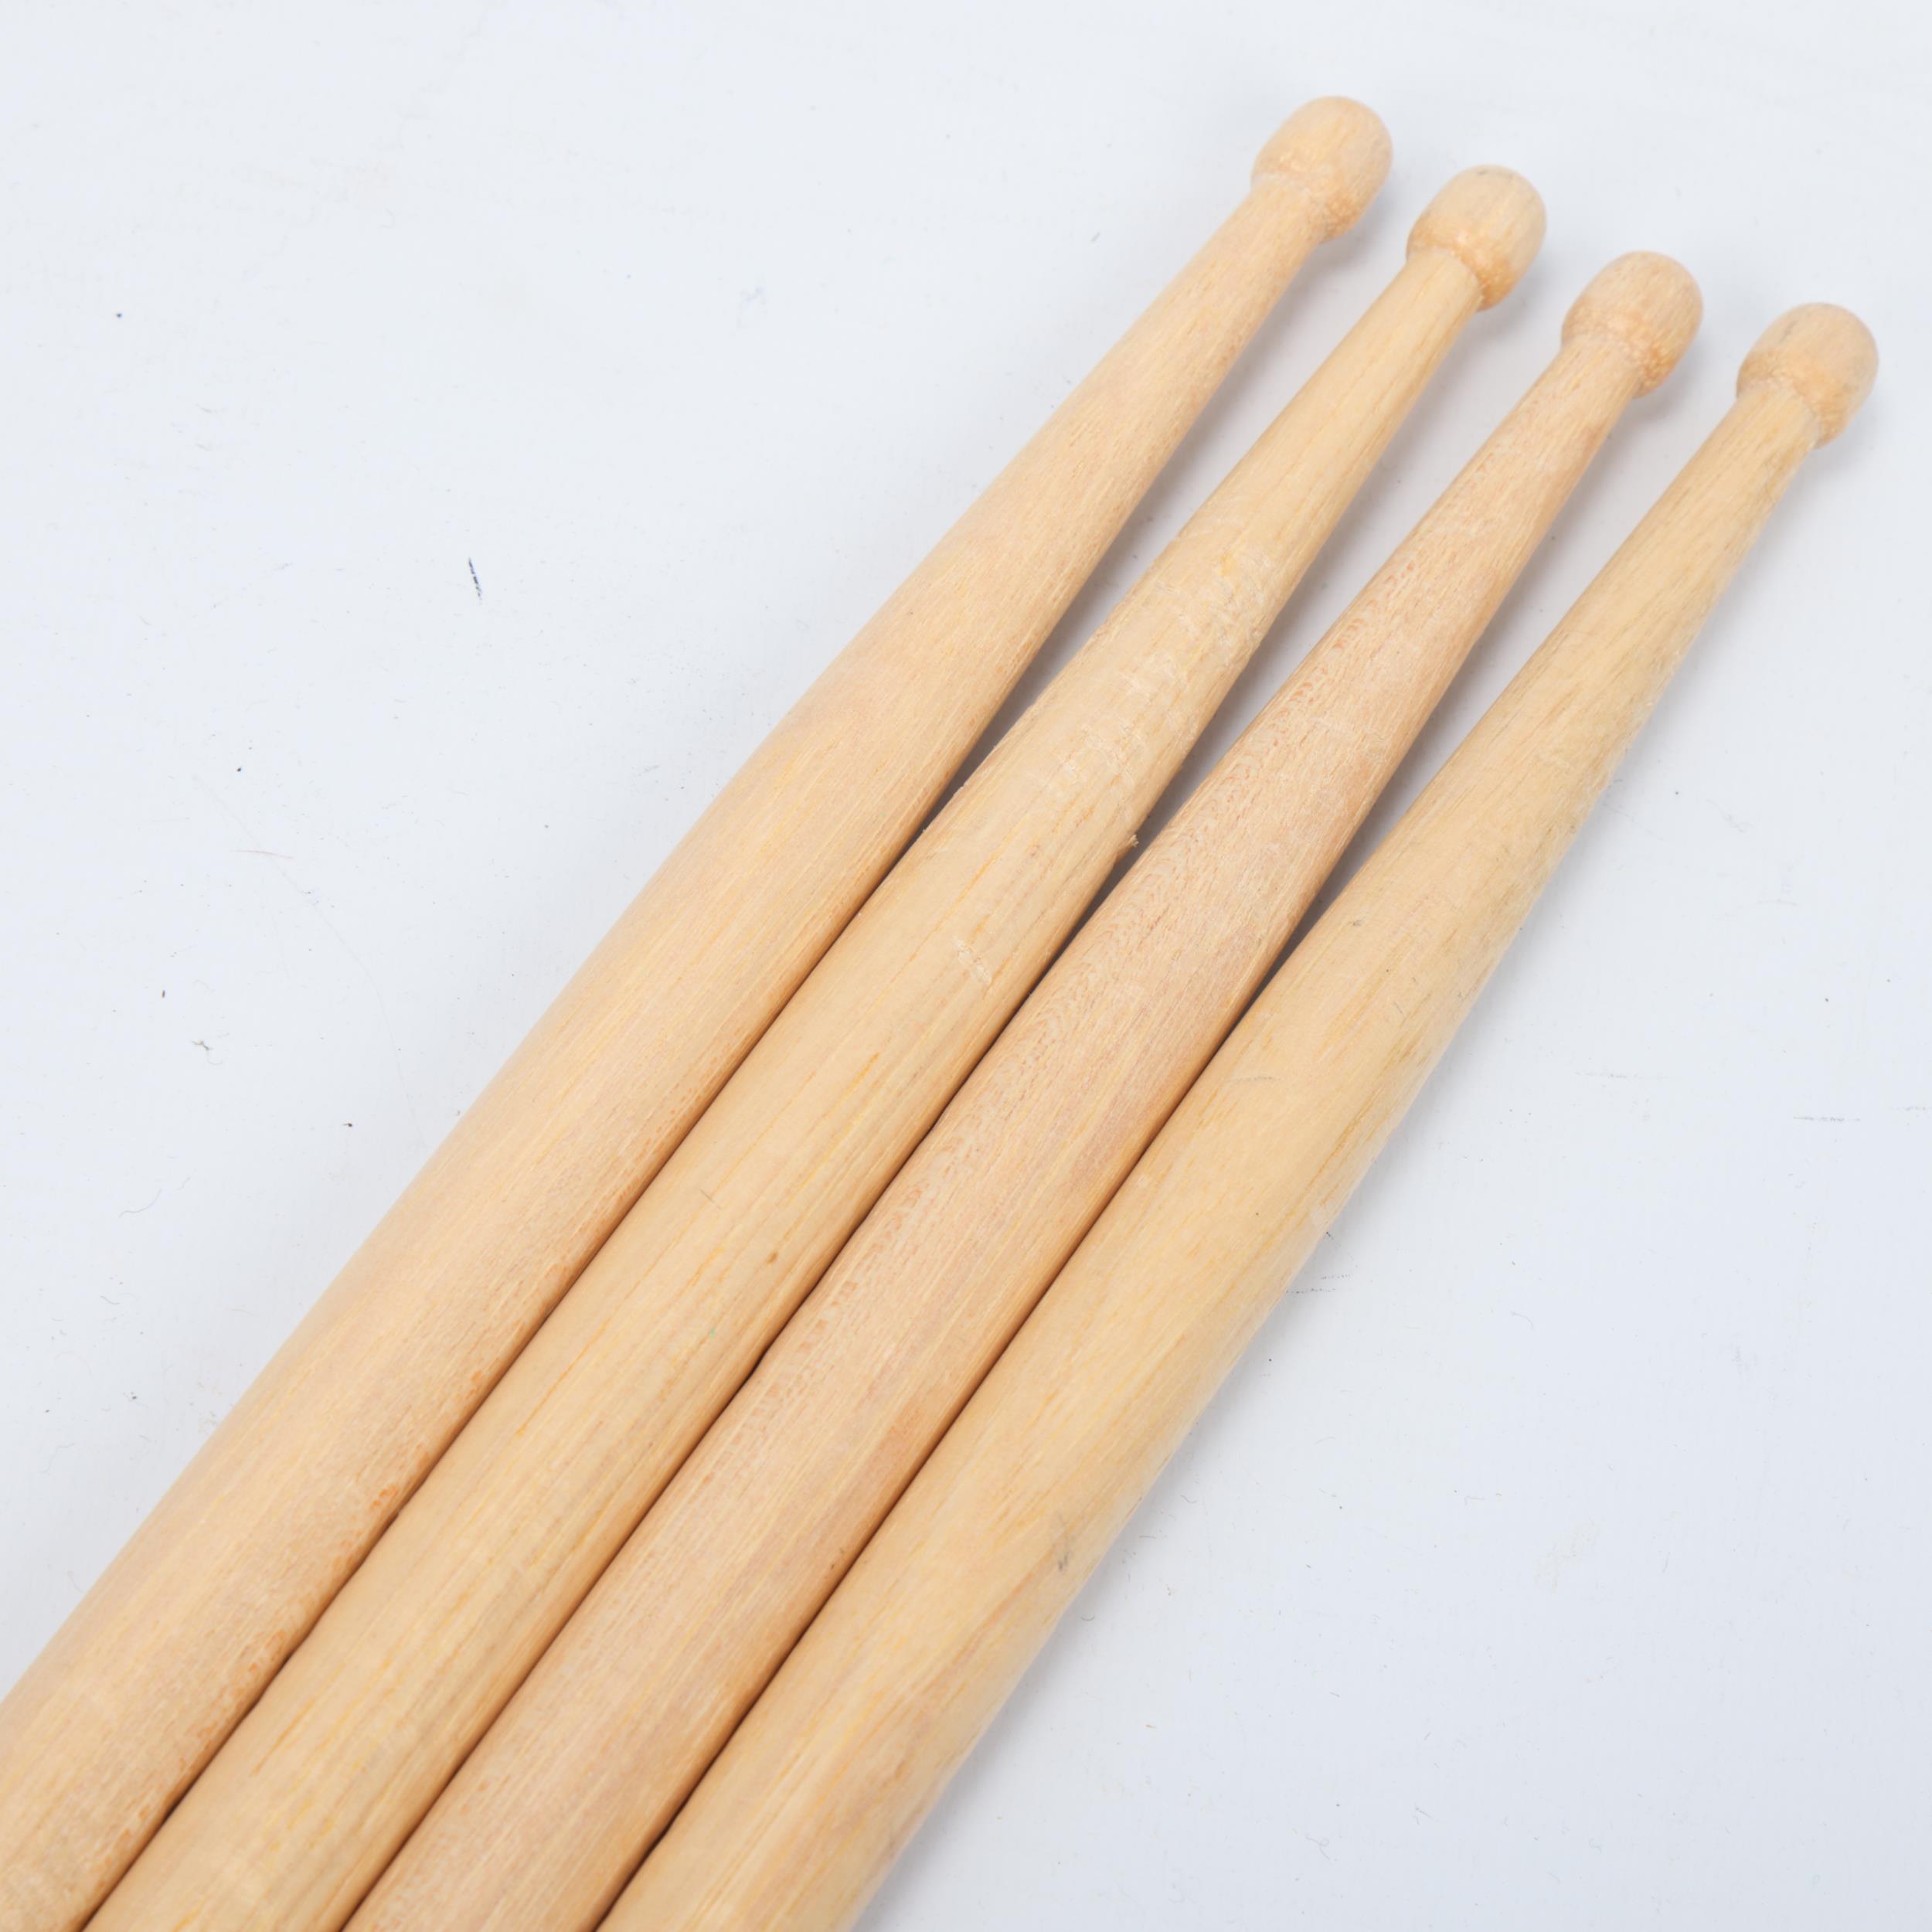 Four USED VATER 'EXCEL' Hickory DRUMSTICKS belonging to MITCH MITCHELL. - Image 3 of 3